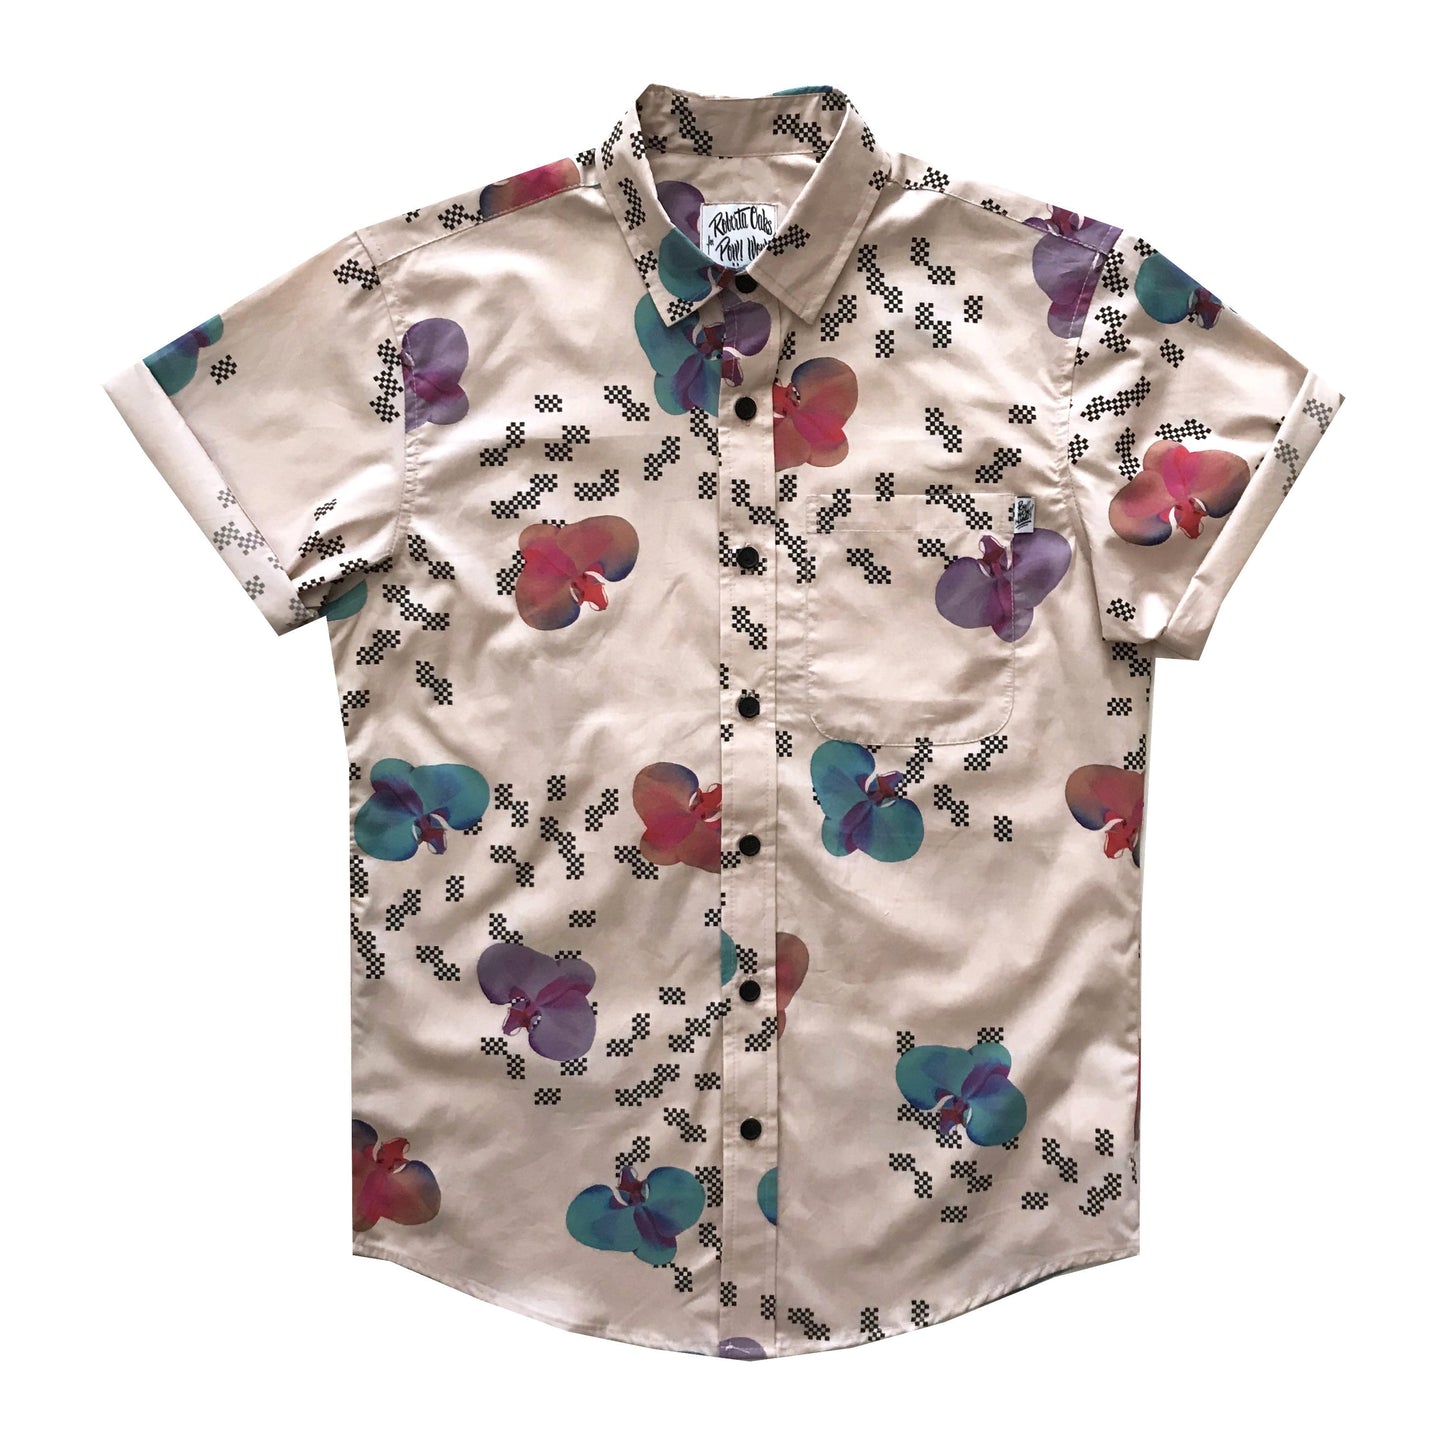 Pow! Wow! Hawaii 2018 Electric Orchid Shirt